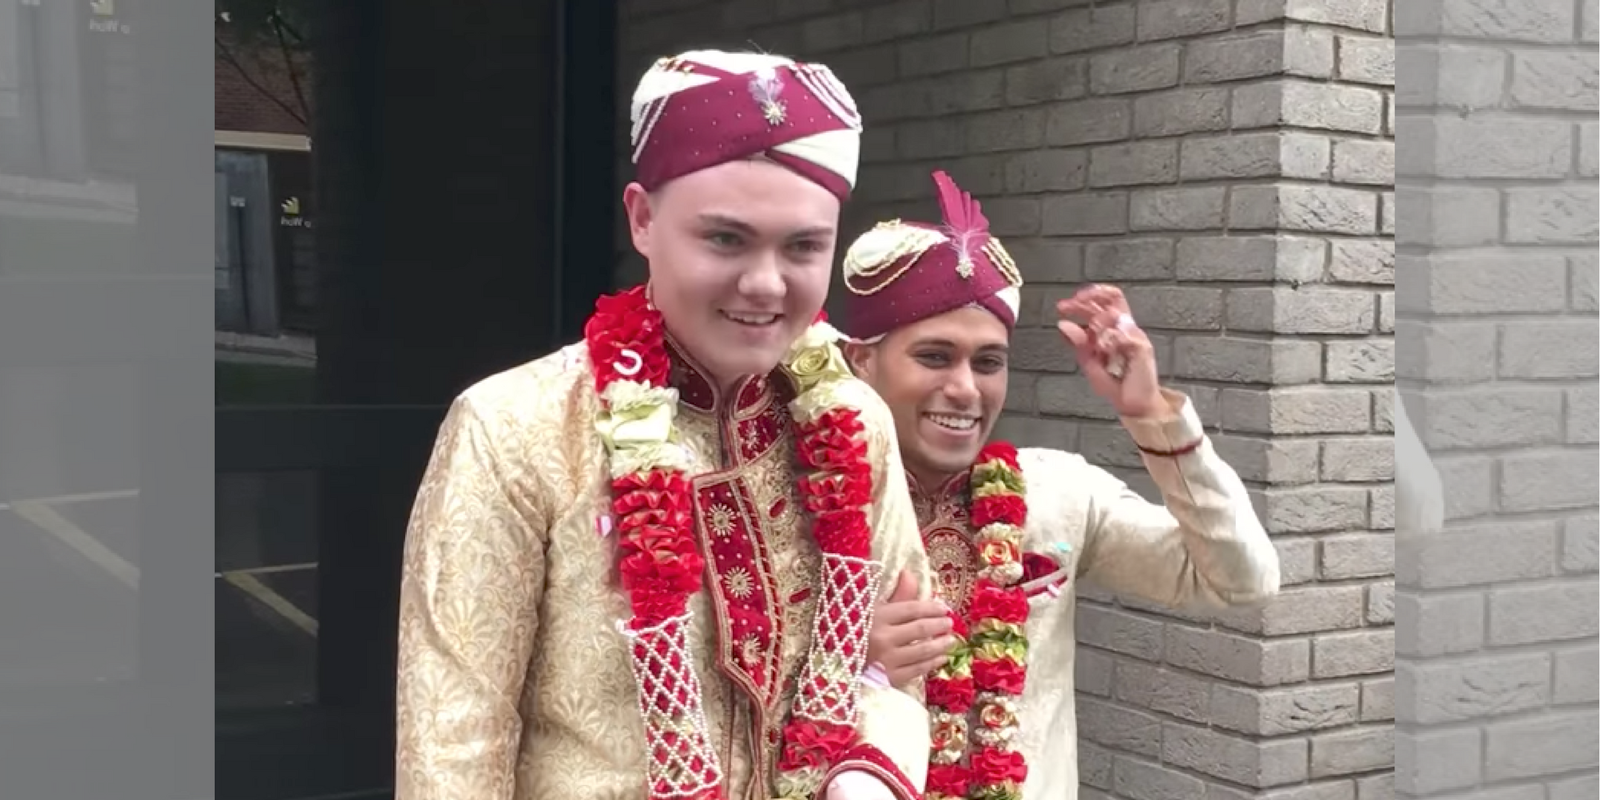 Sean Rogan and Jahed Choudhury, the first Muslim in a gay marriage